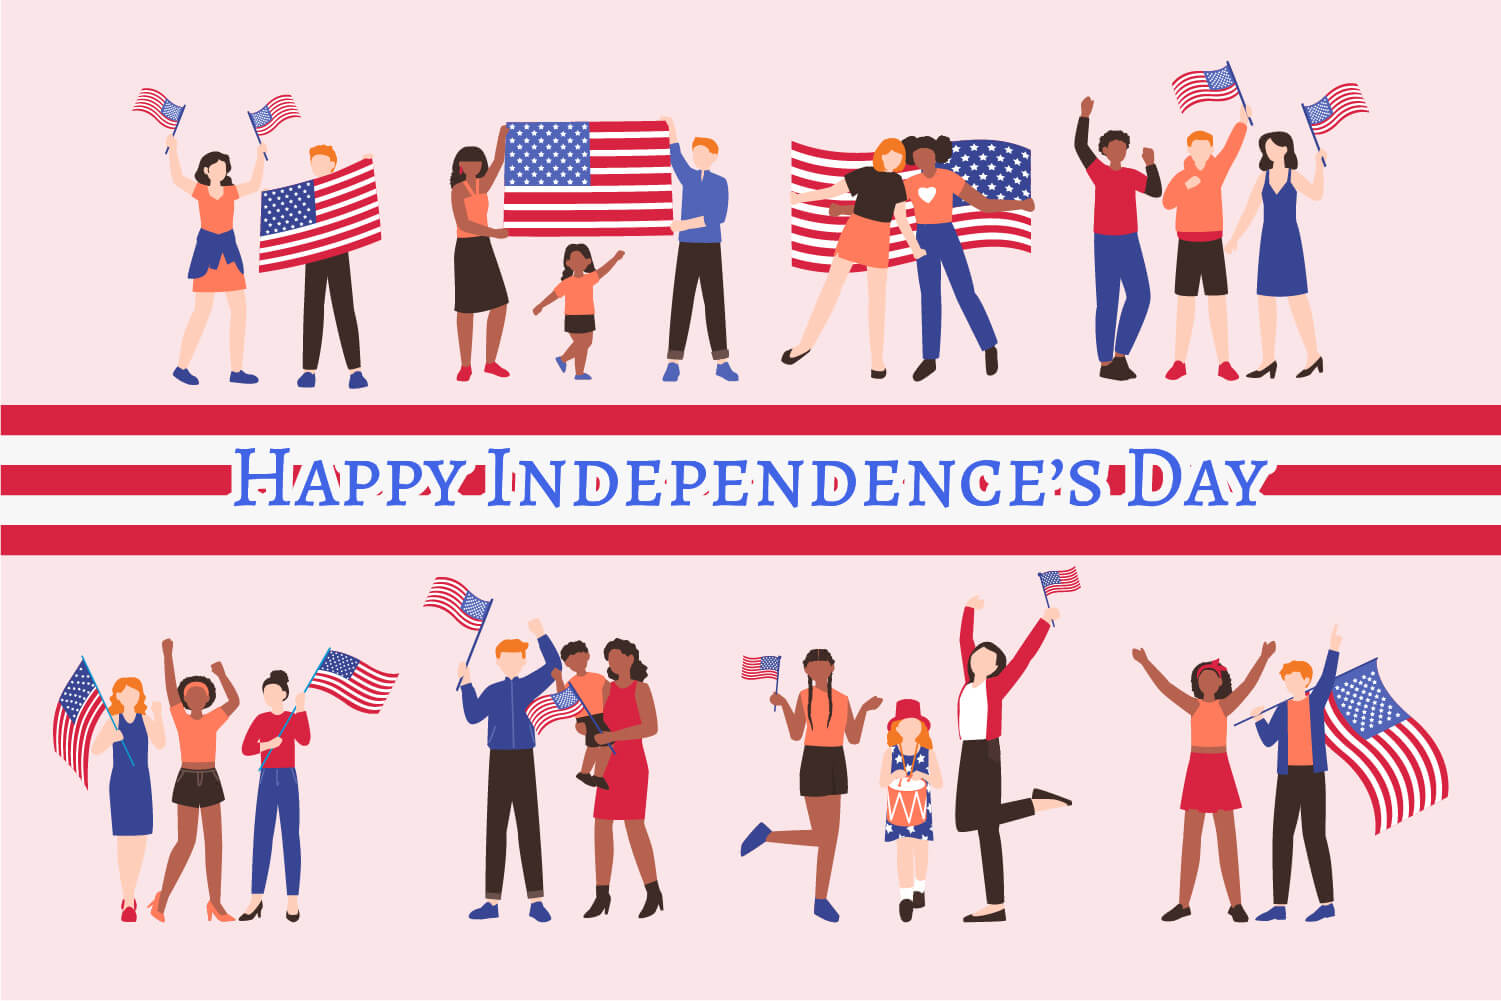 Clipart of Independence Day celebration symbolizing American flags and American youth.